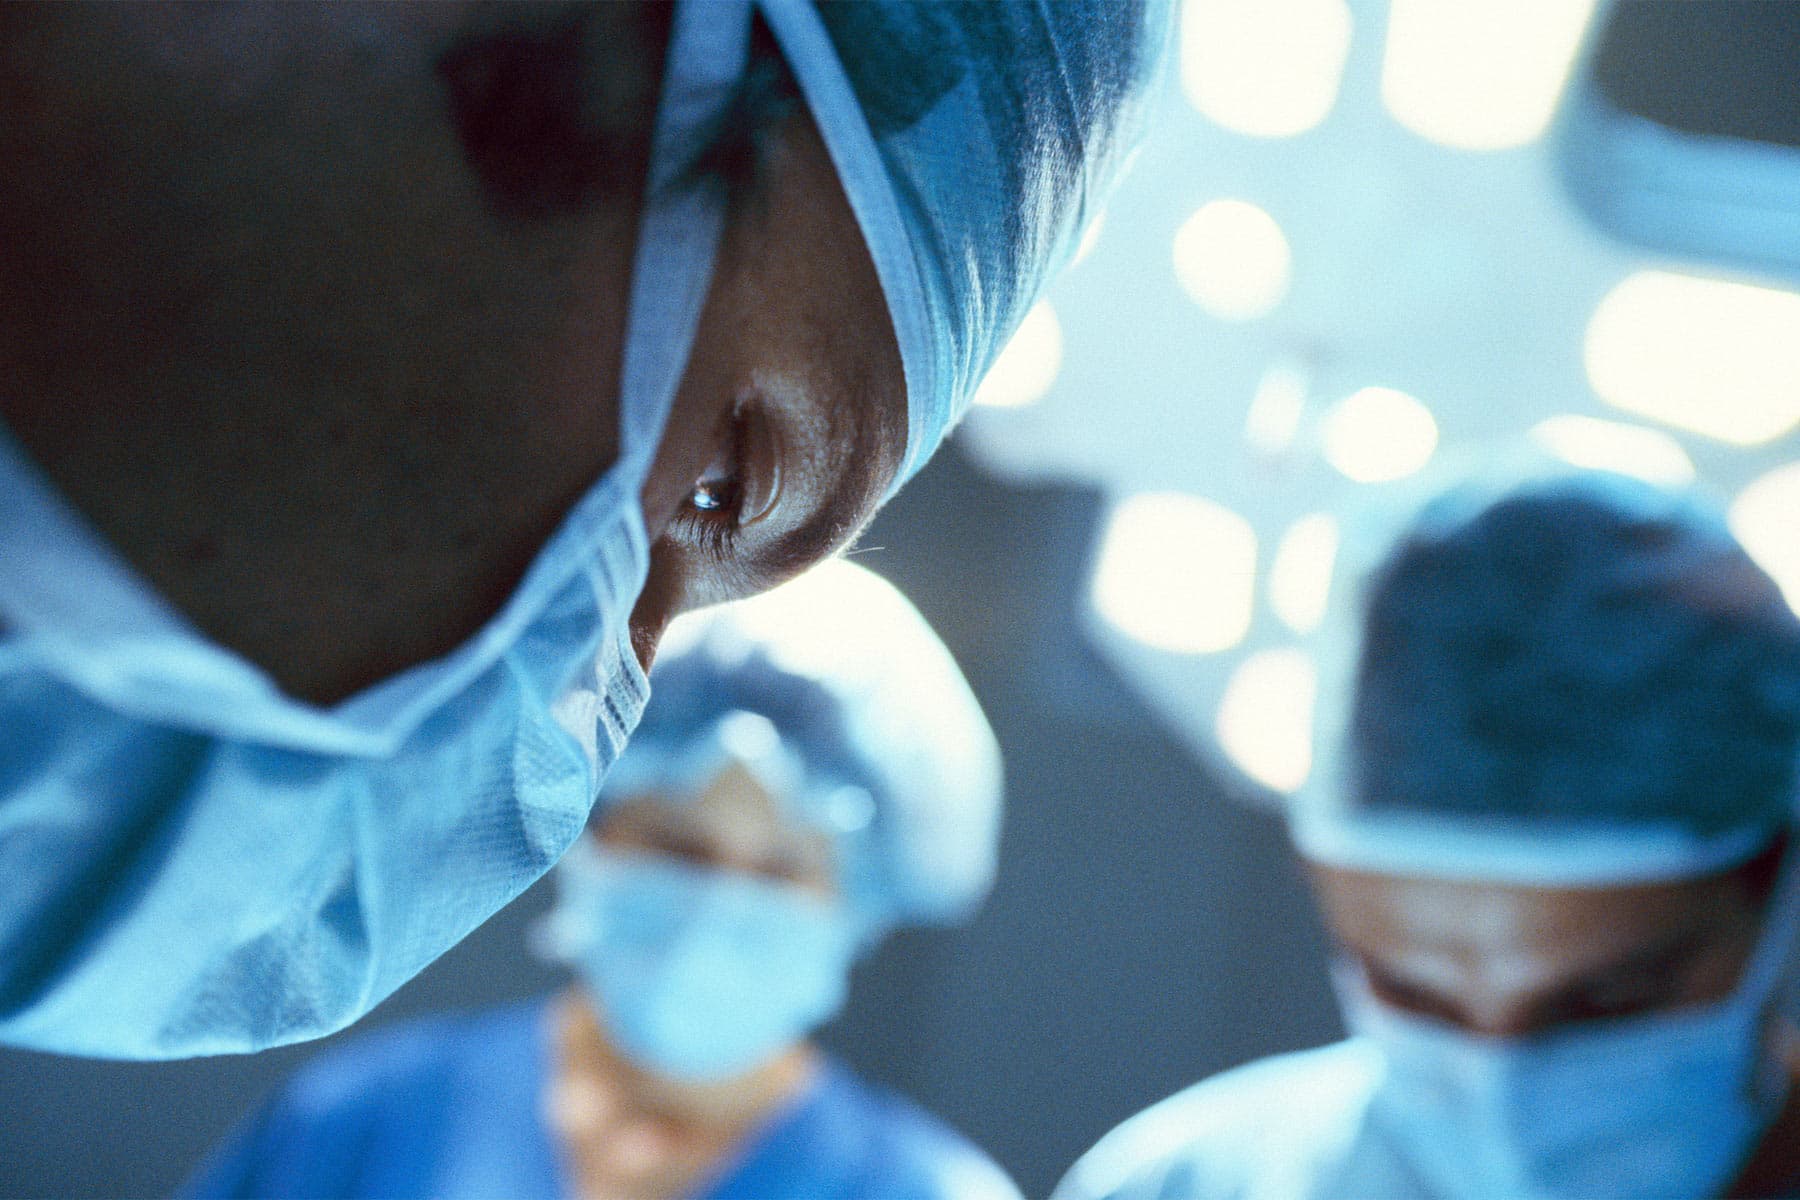 Men Offered Surgery More Often Than Women for Carpal Tunnel